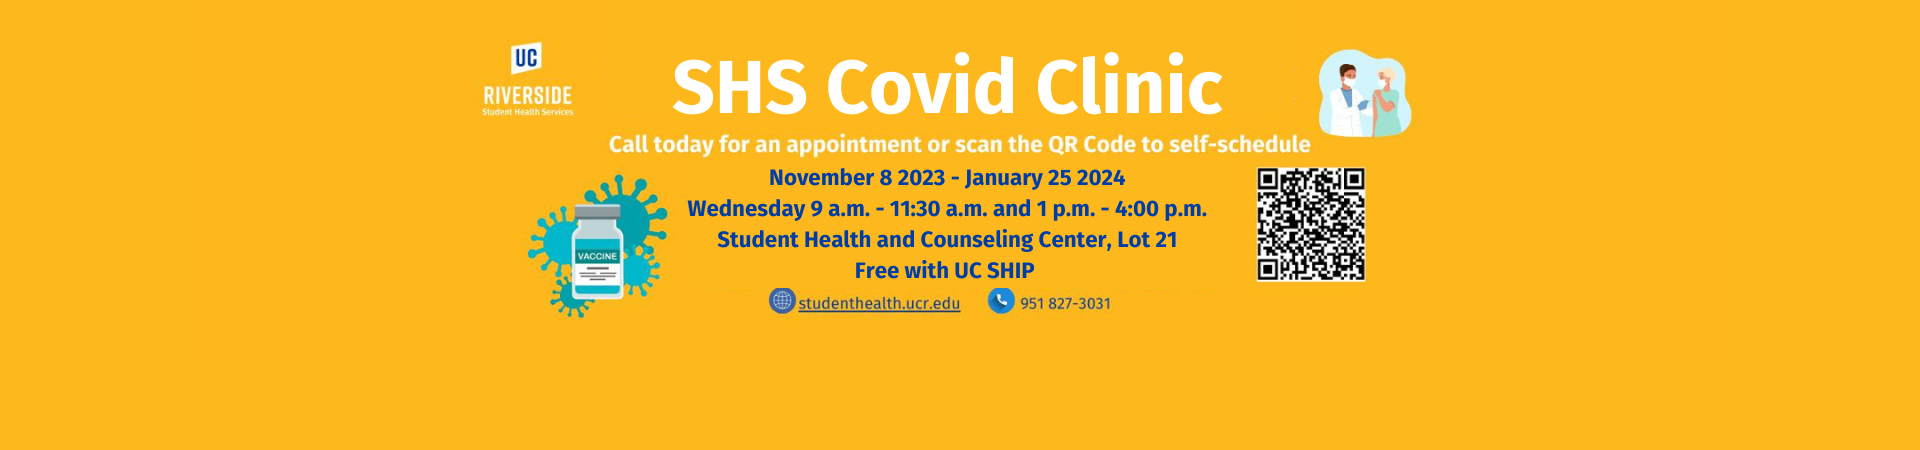 COVID Clinic Nov. 8, 2023 through Jan. 25, 2024. Call (951) 827-3031 to schedule appointment.